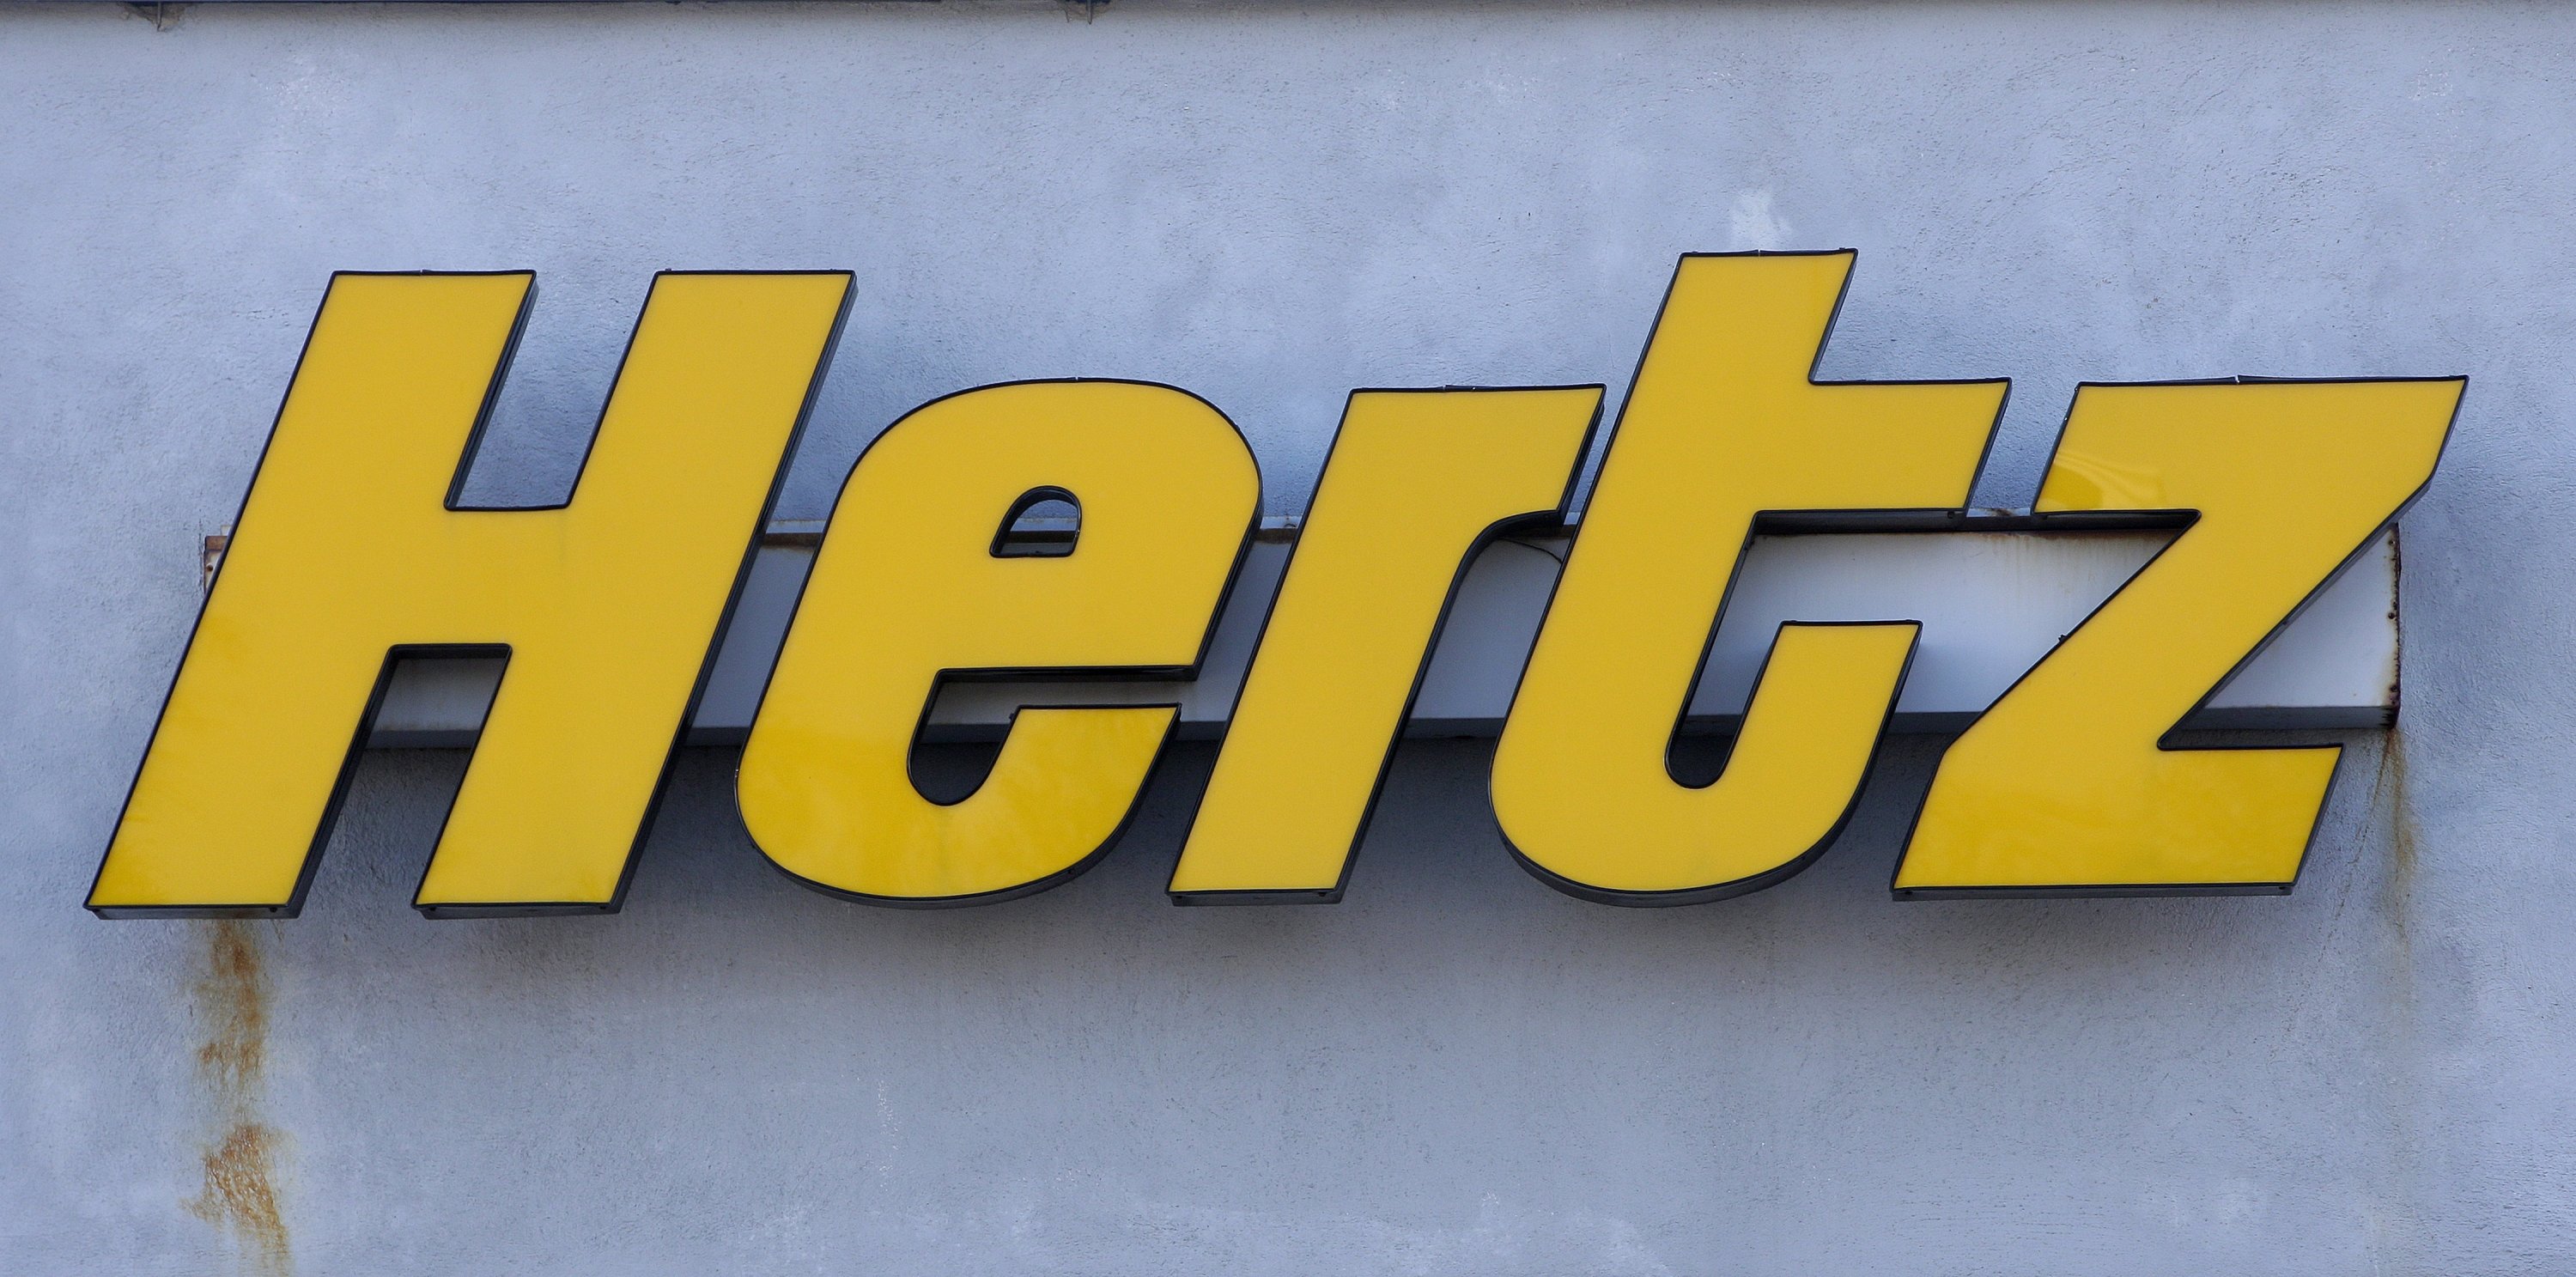 A Hertz rental car logo rests on the front of a Hertz location, in Boston, United States, Nov. 28, 2017. (AP Photo)